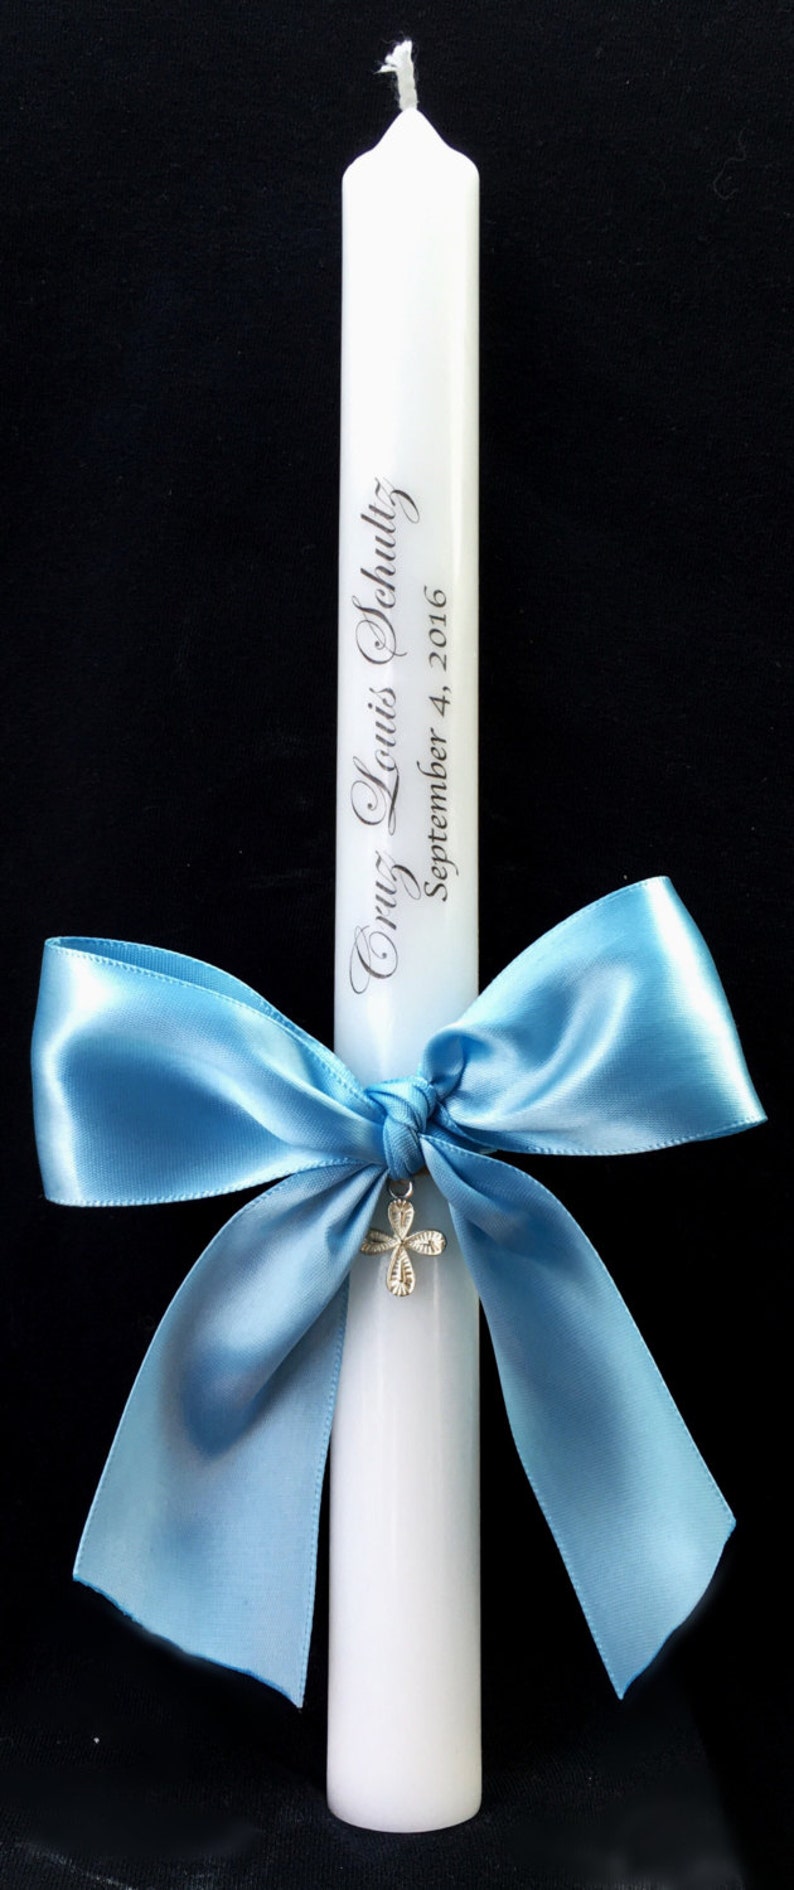 Personalized Baptismal Candles 10 inches 10 Personalized Ceremonial Baptism Candle with a bow, a charm. It's the perfect Baptism gift image 7